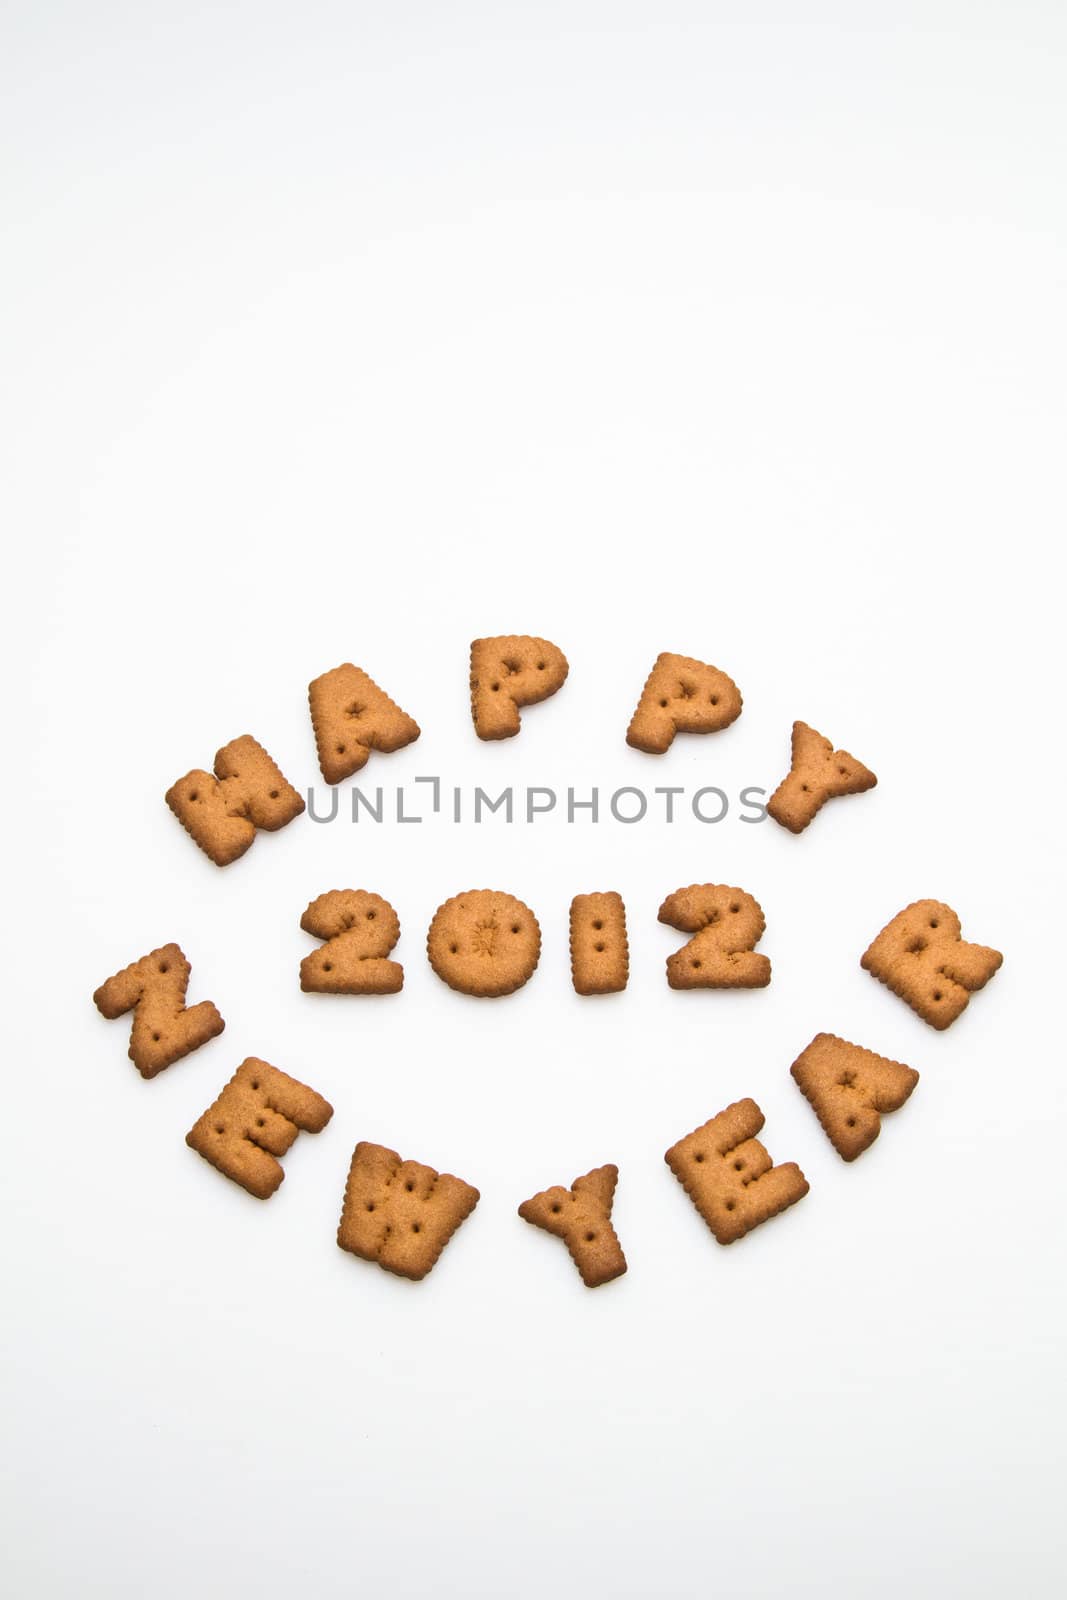 Happy New Year 2012 greeting words made by brown biscuits in lower center of white surface in portrait orientation for background use